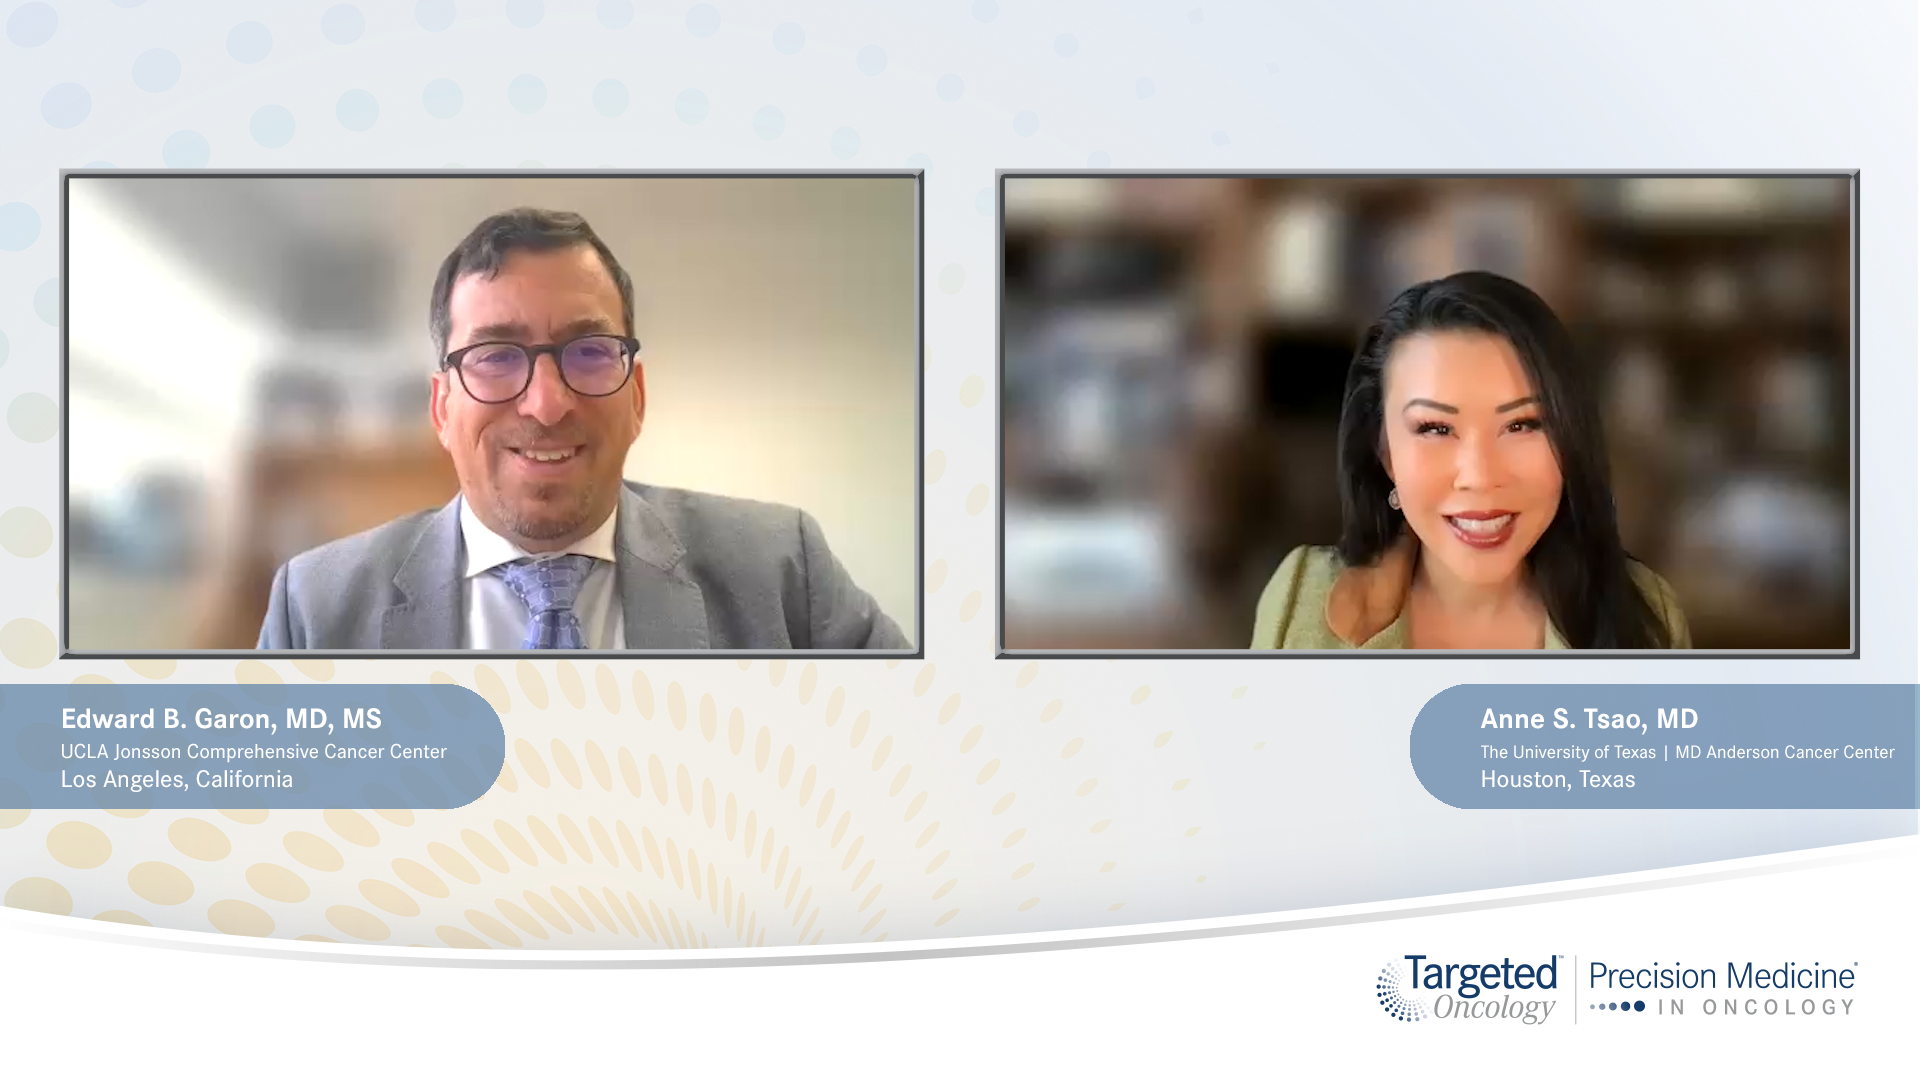 Edward B. Garon, MD, MS, and Anne S. Tsao, MD, experts on lung cancer